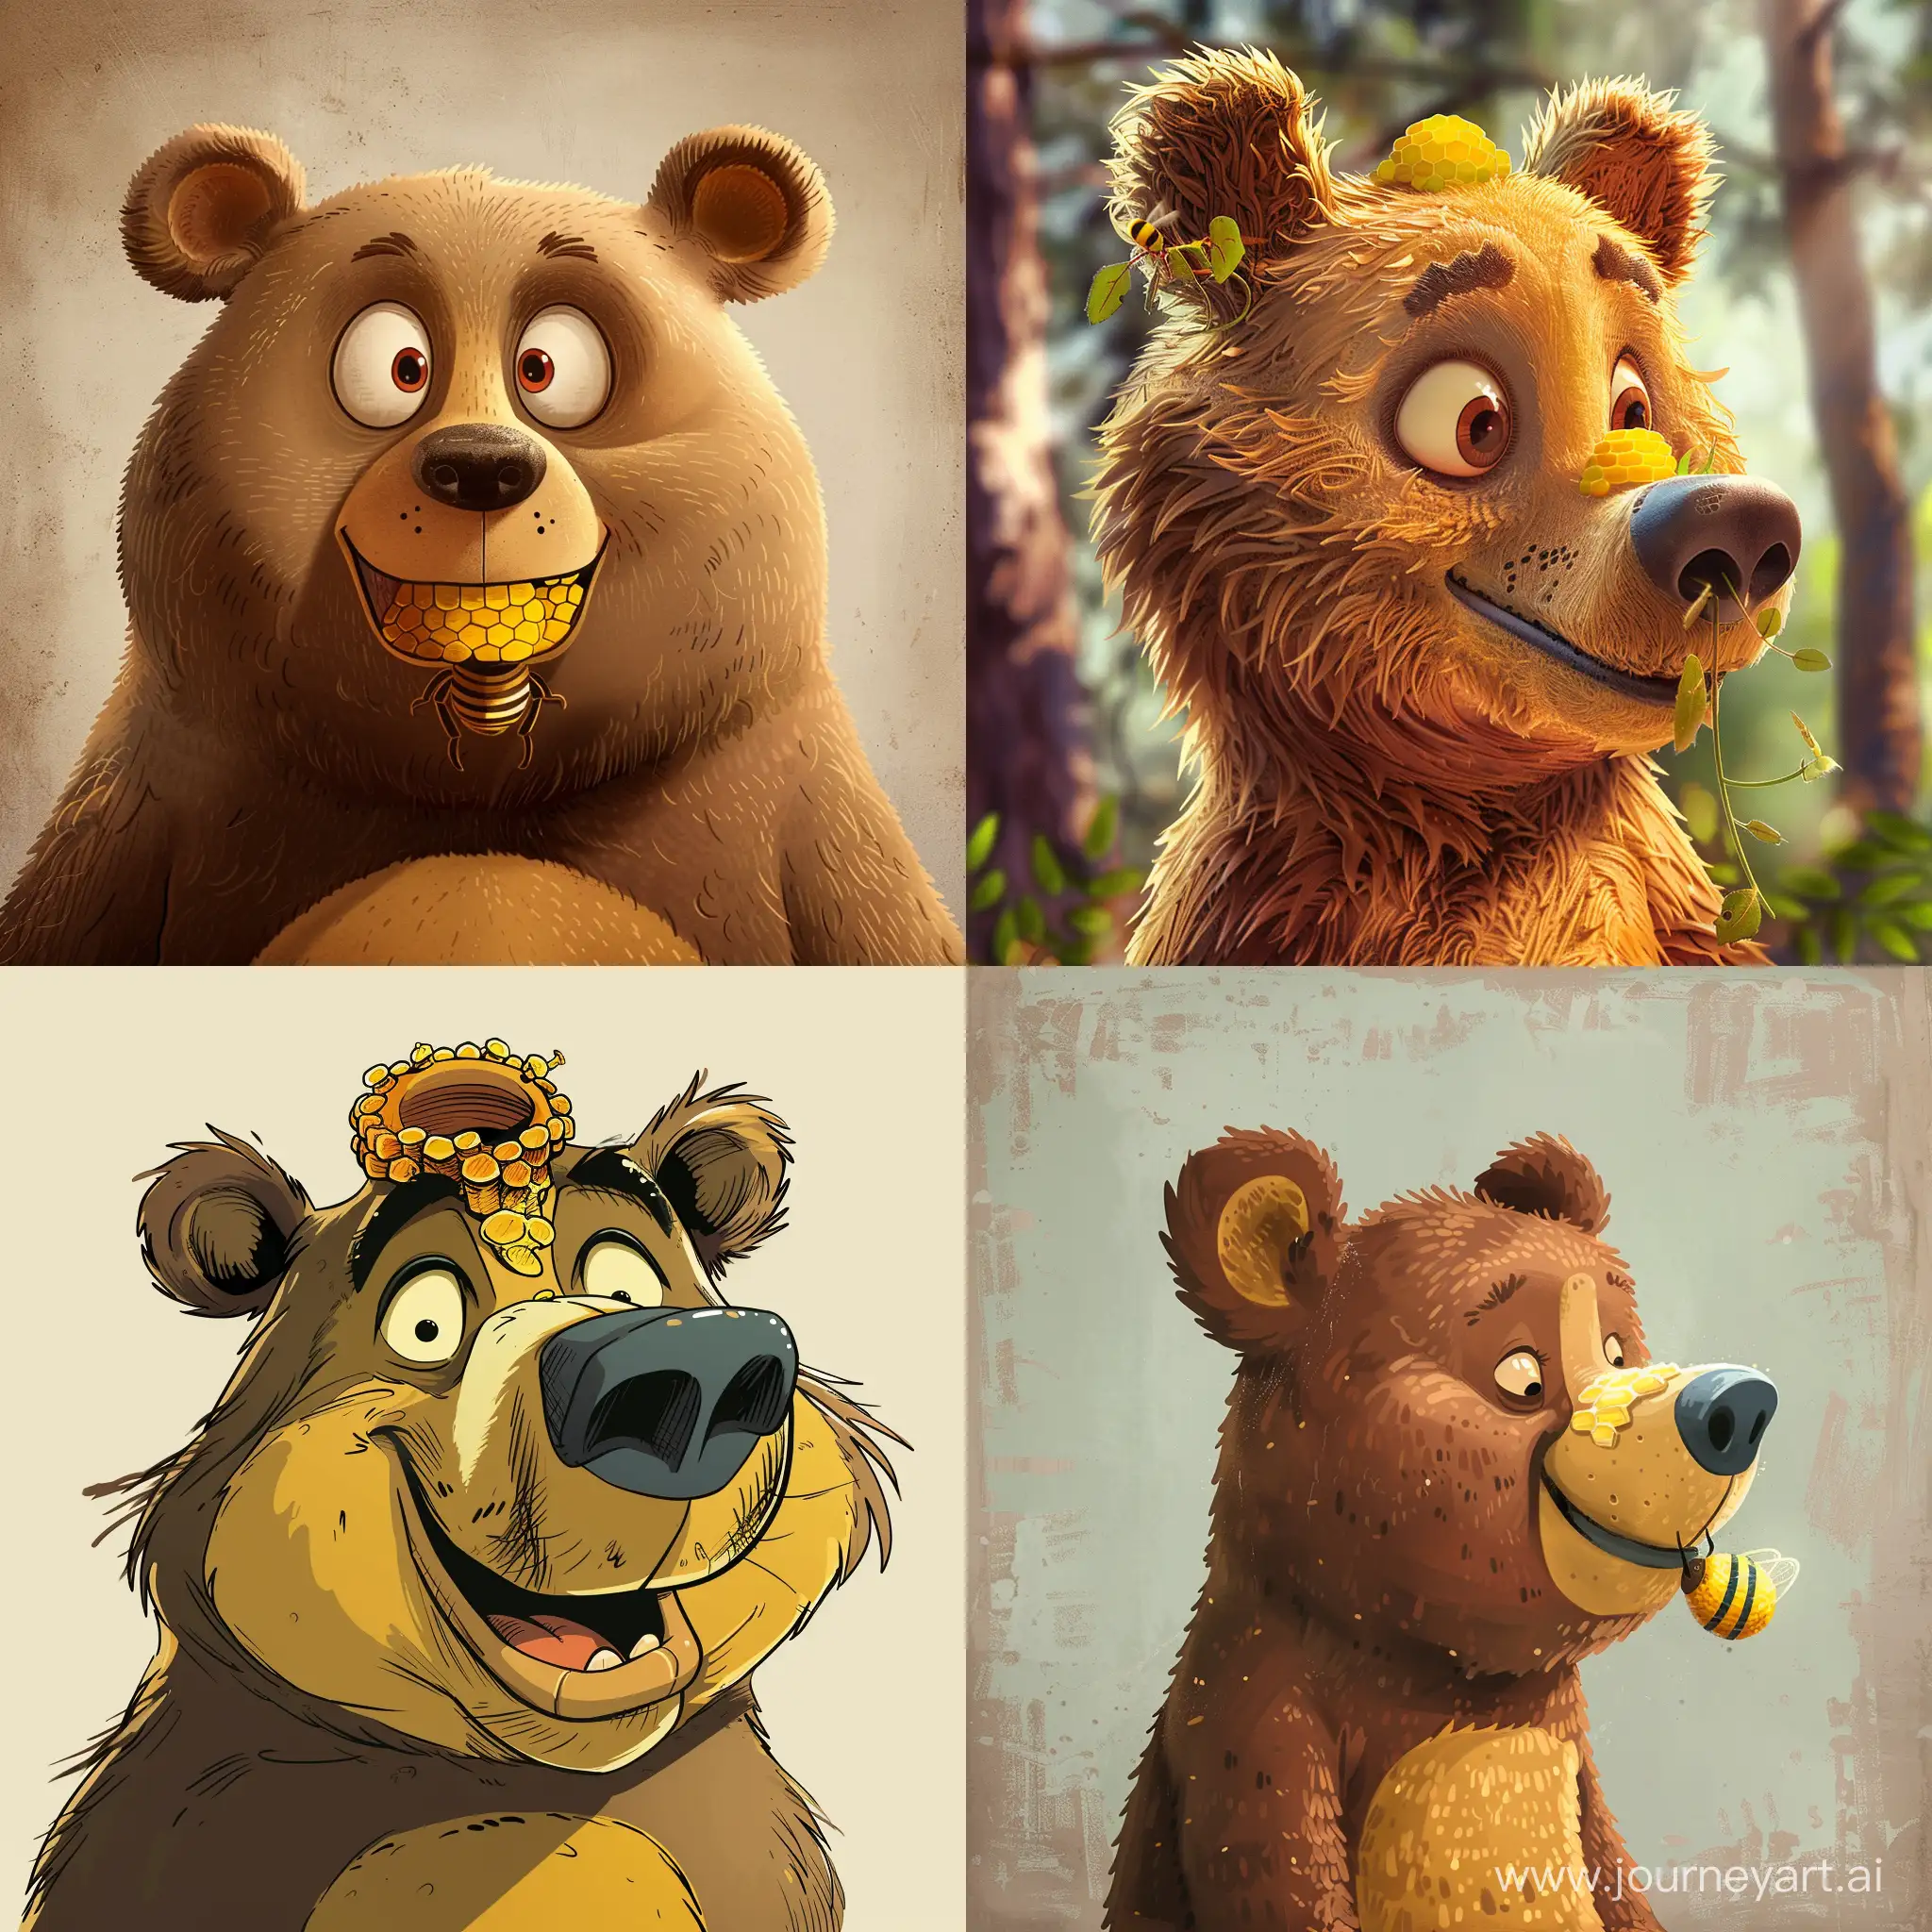 Whimsical-Cartoon-Bear-with-Beehive-Nose-Playful-1950sInspired-Character-Art